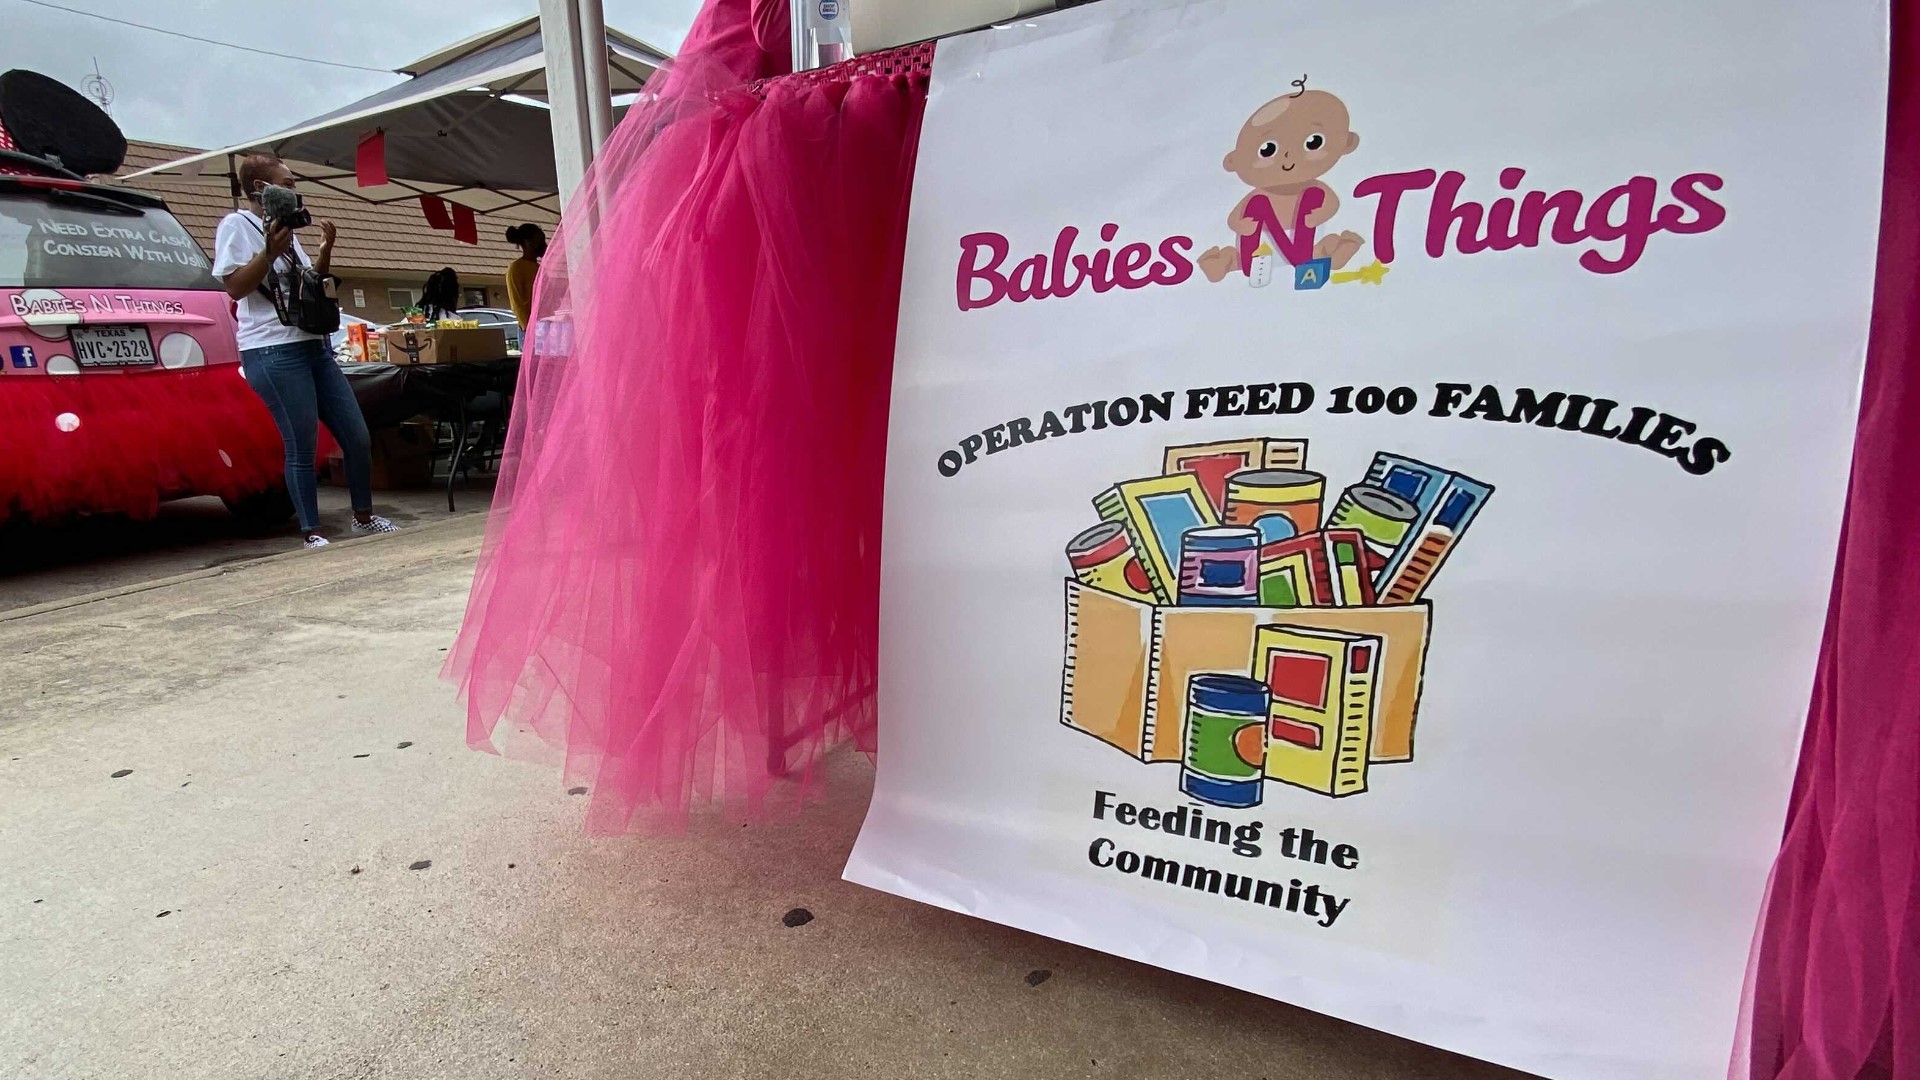 Babies N Things in Copperas Cove celebrated their ten year anniversary by giving back to the community they said has helped them stay open for the past decade.